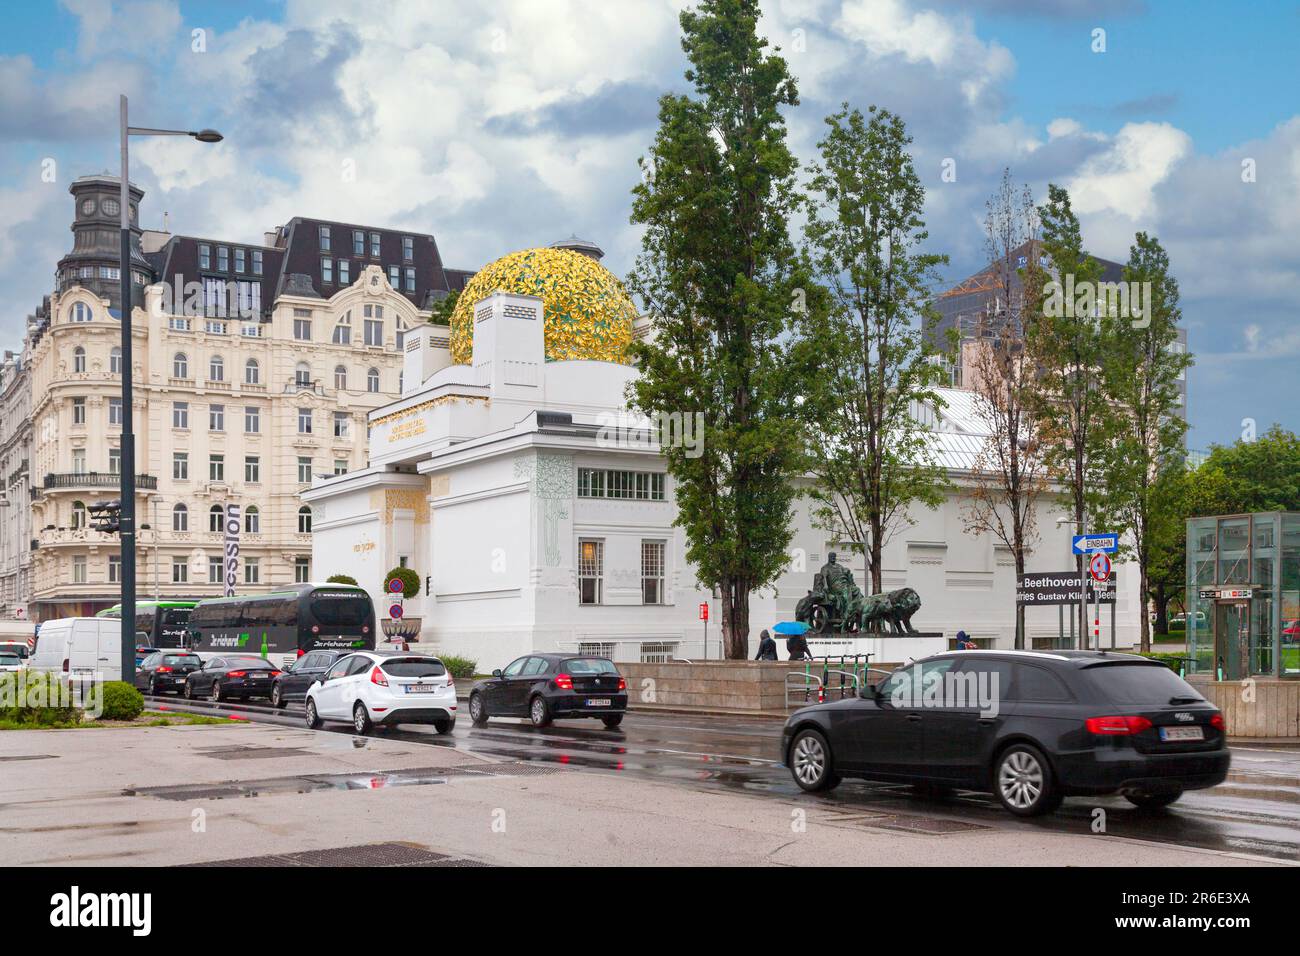 Vienna, Austria - May 29 2019: Secession is a contemporary-art museum with a dome of gilded laurels & temporary exhibitions by renowned artists. Stock Photo